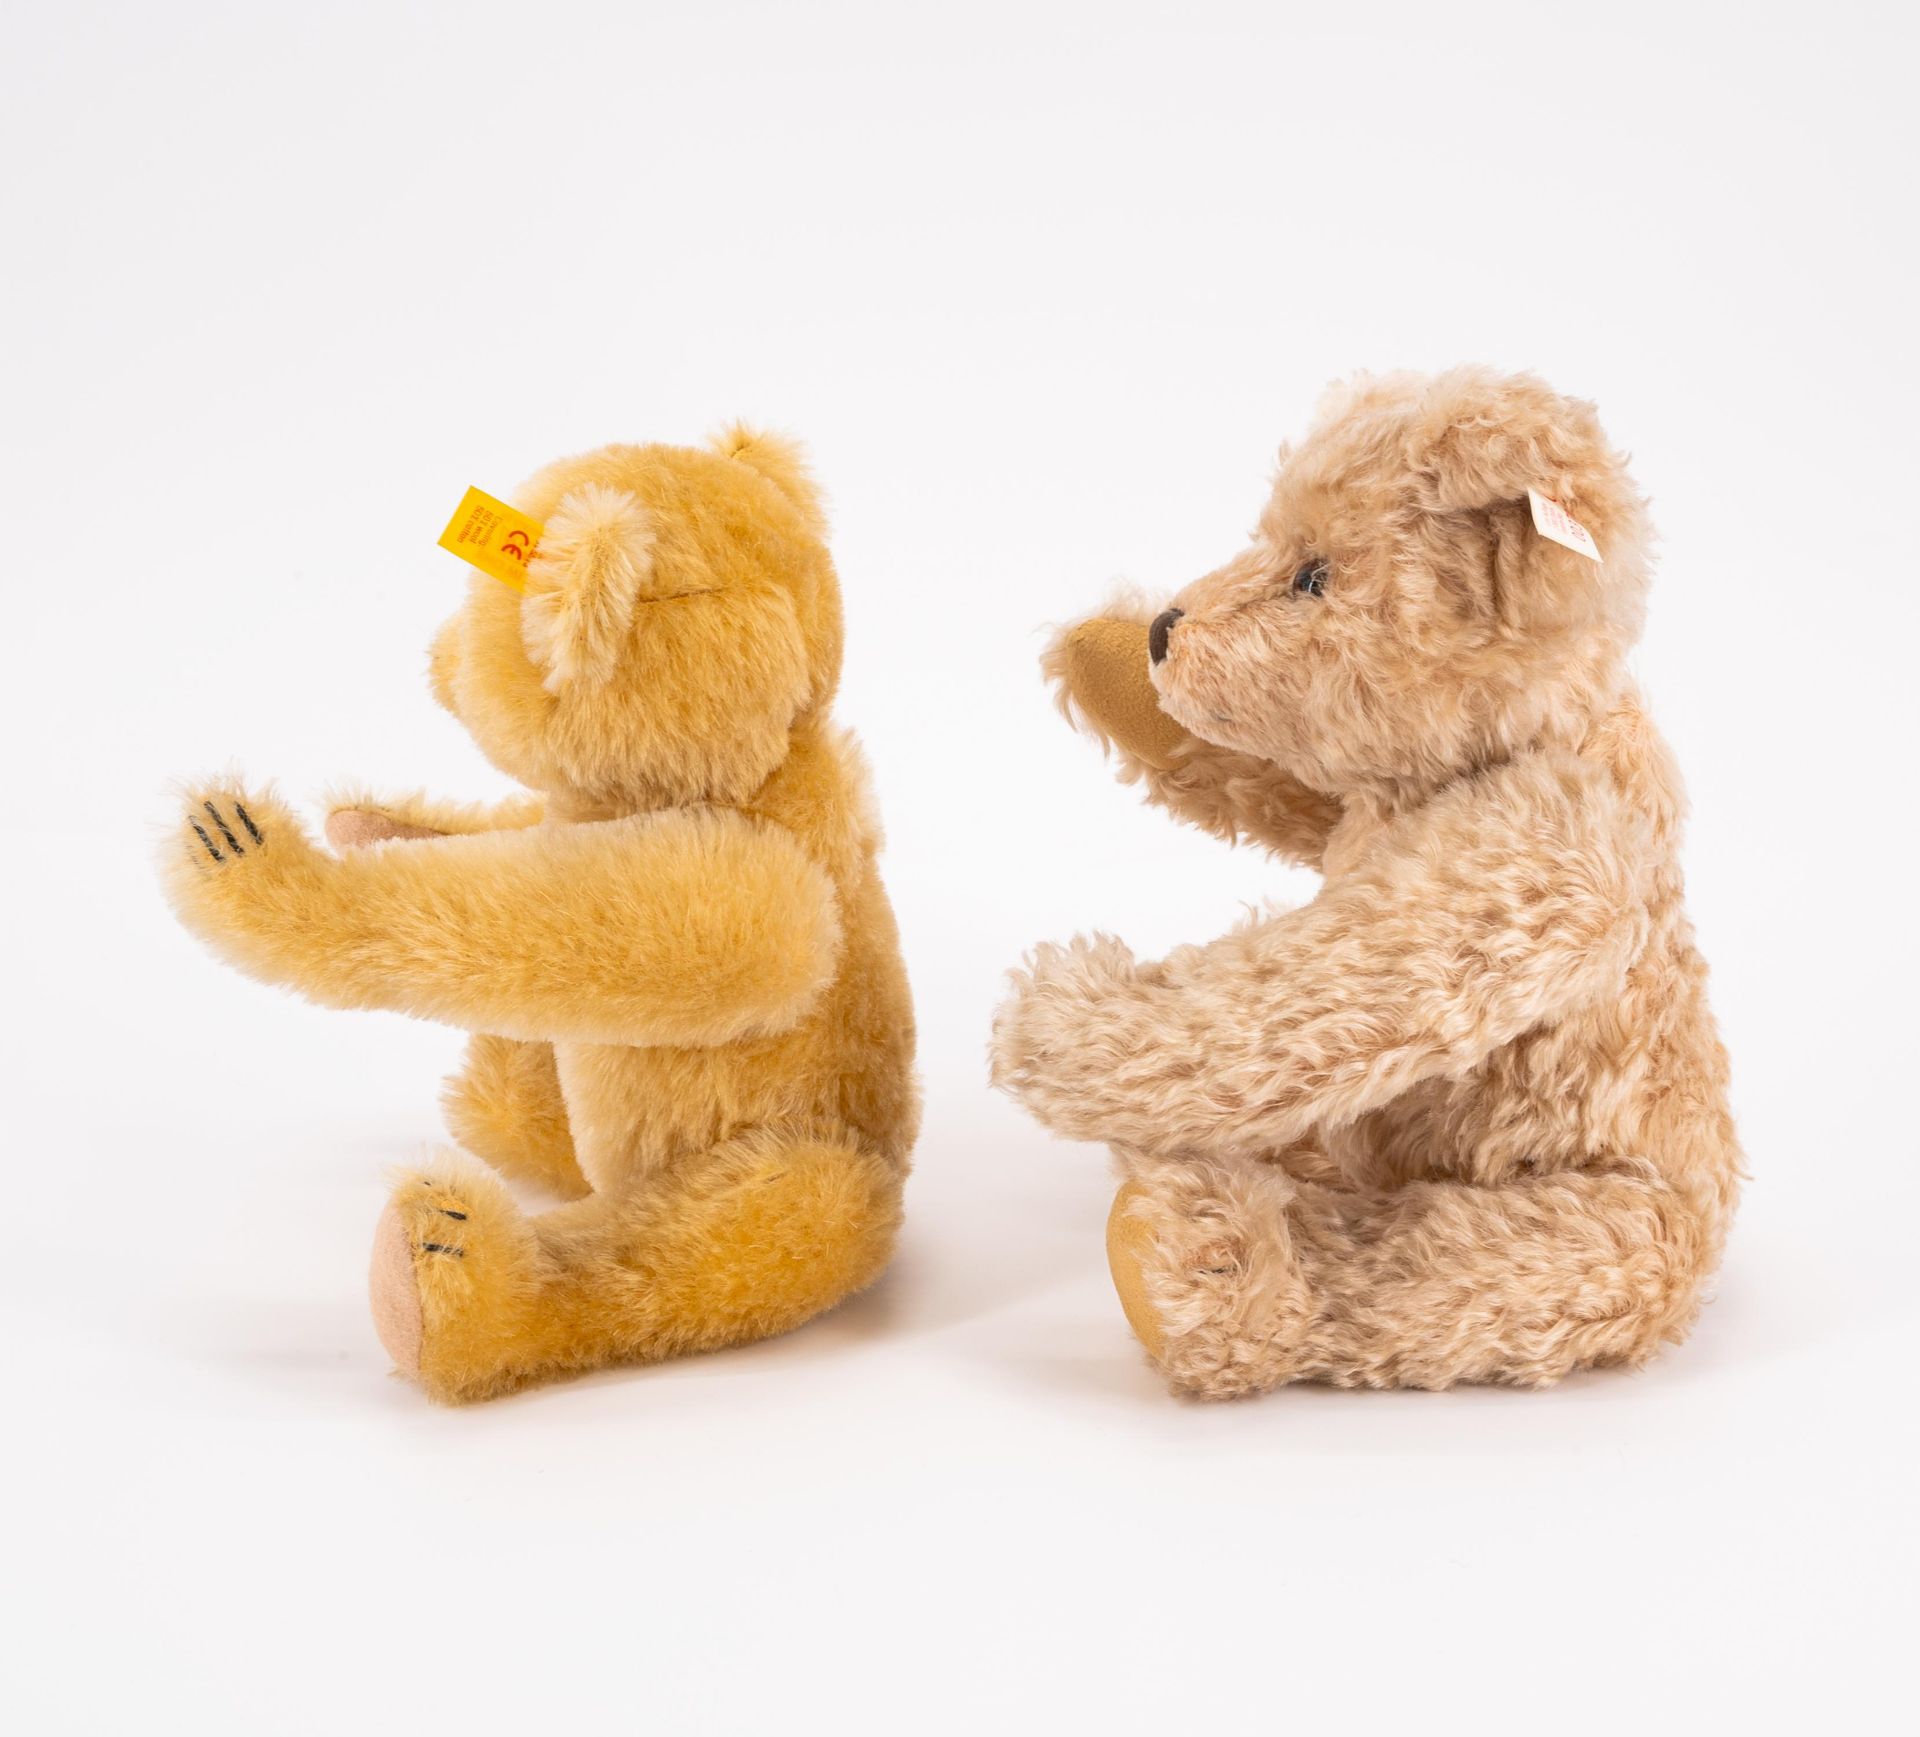 Steiff: TWO STEIFF BEARS FROM COLLECTORS EDITIONS MADE OF MOHAIR PLUSH, WOOL AND GLASS - Image 2 of 8